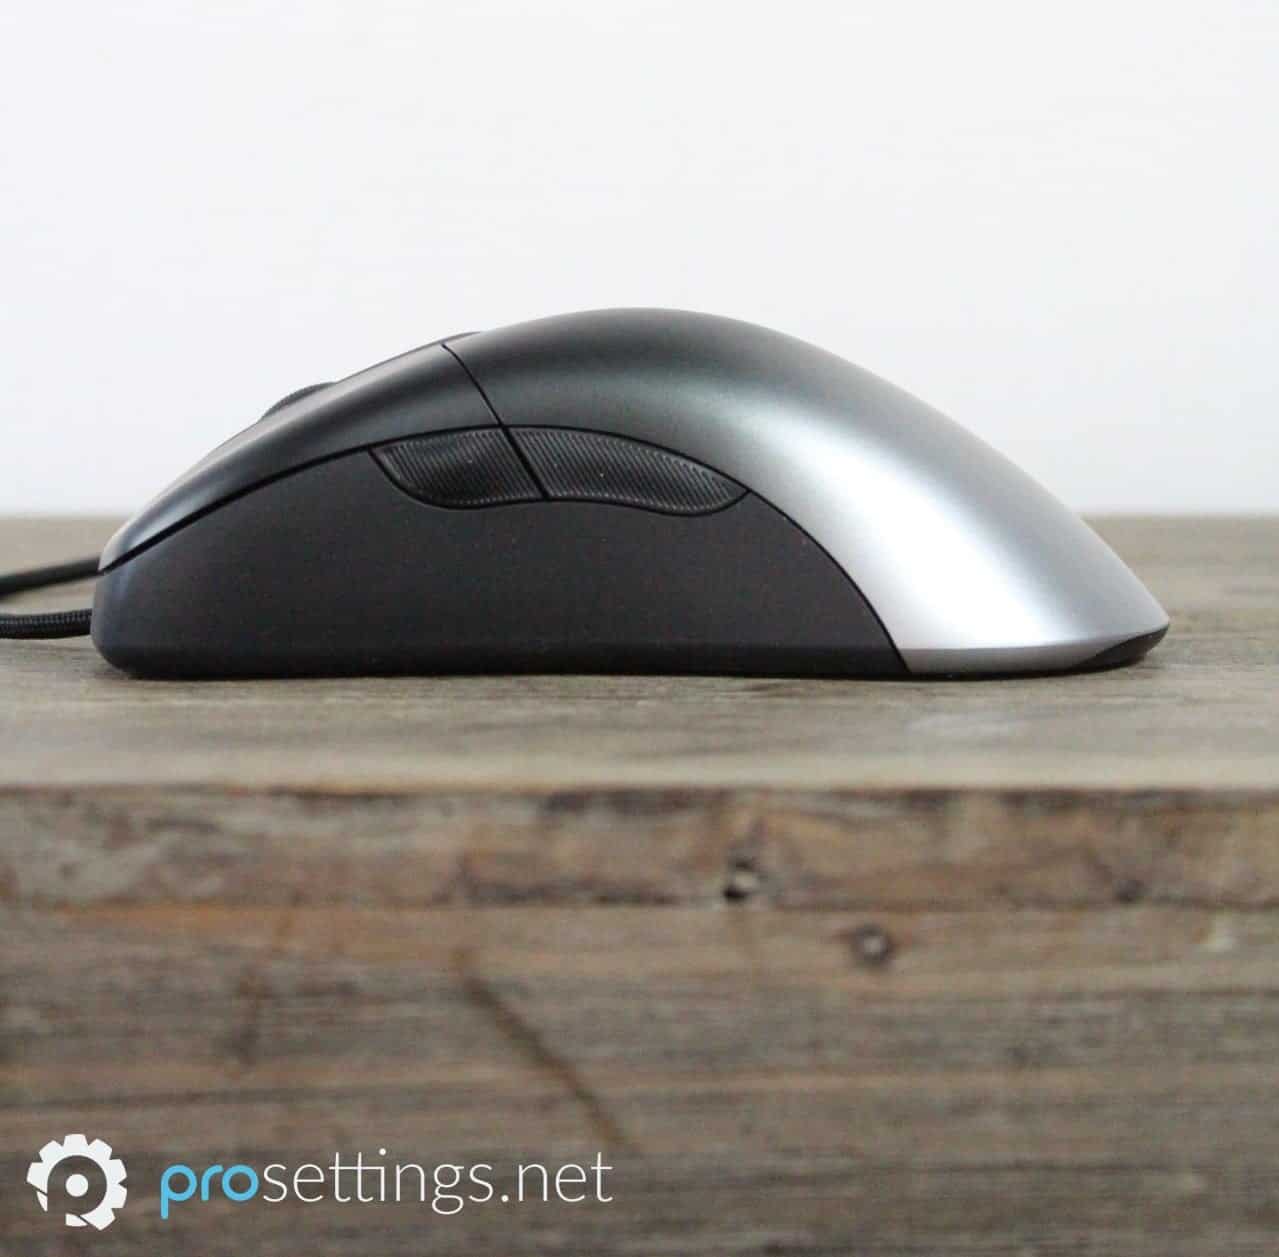 Microsoft Intellimouse Pro Side Review Mouse